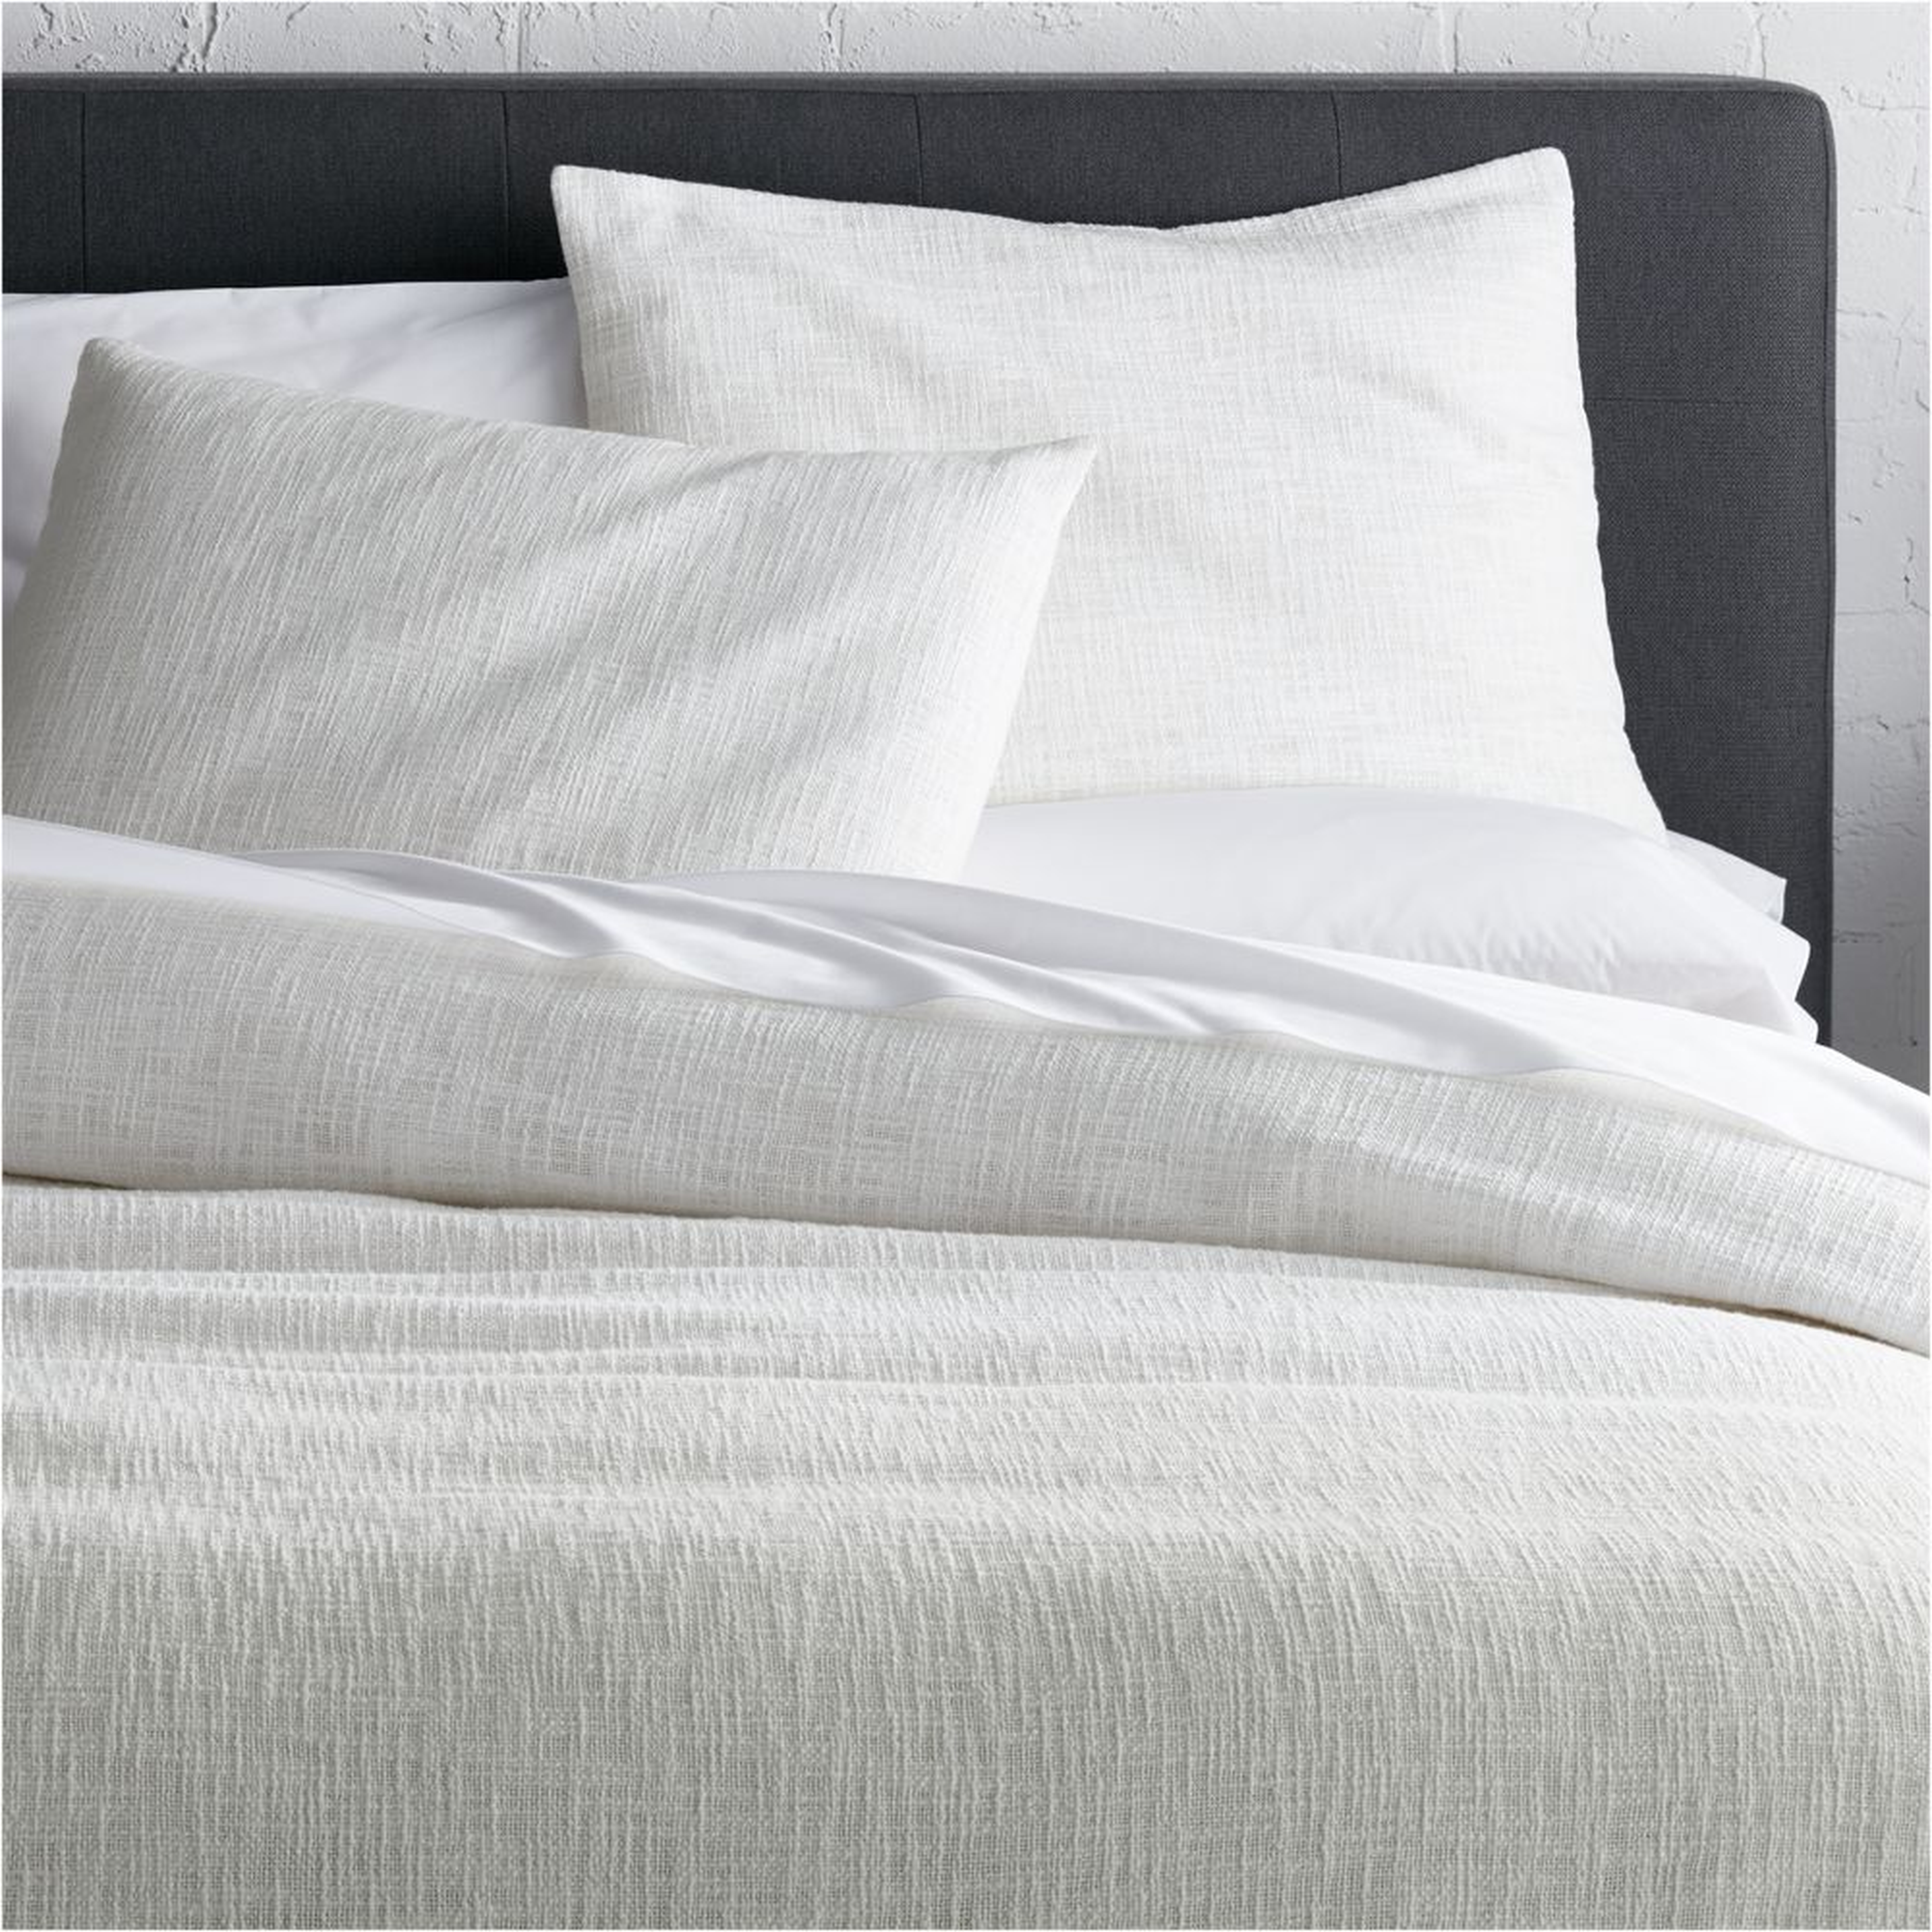 Lindstrom White Full/Queen Duvet Cover - Crate and Barrel